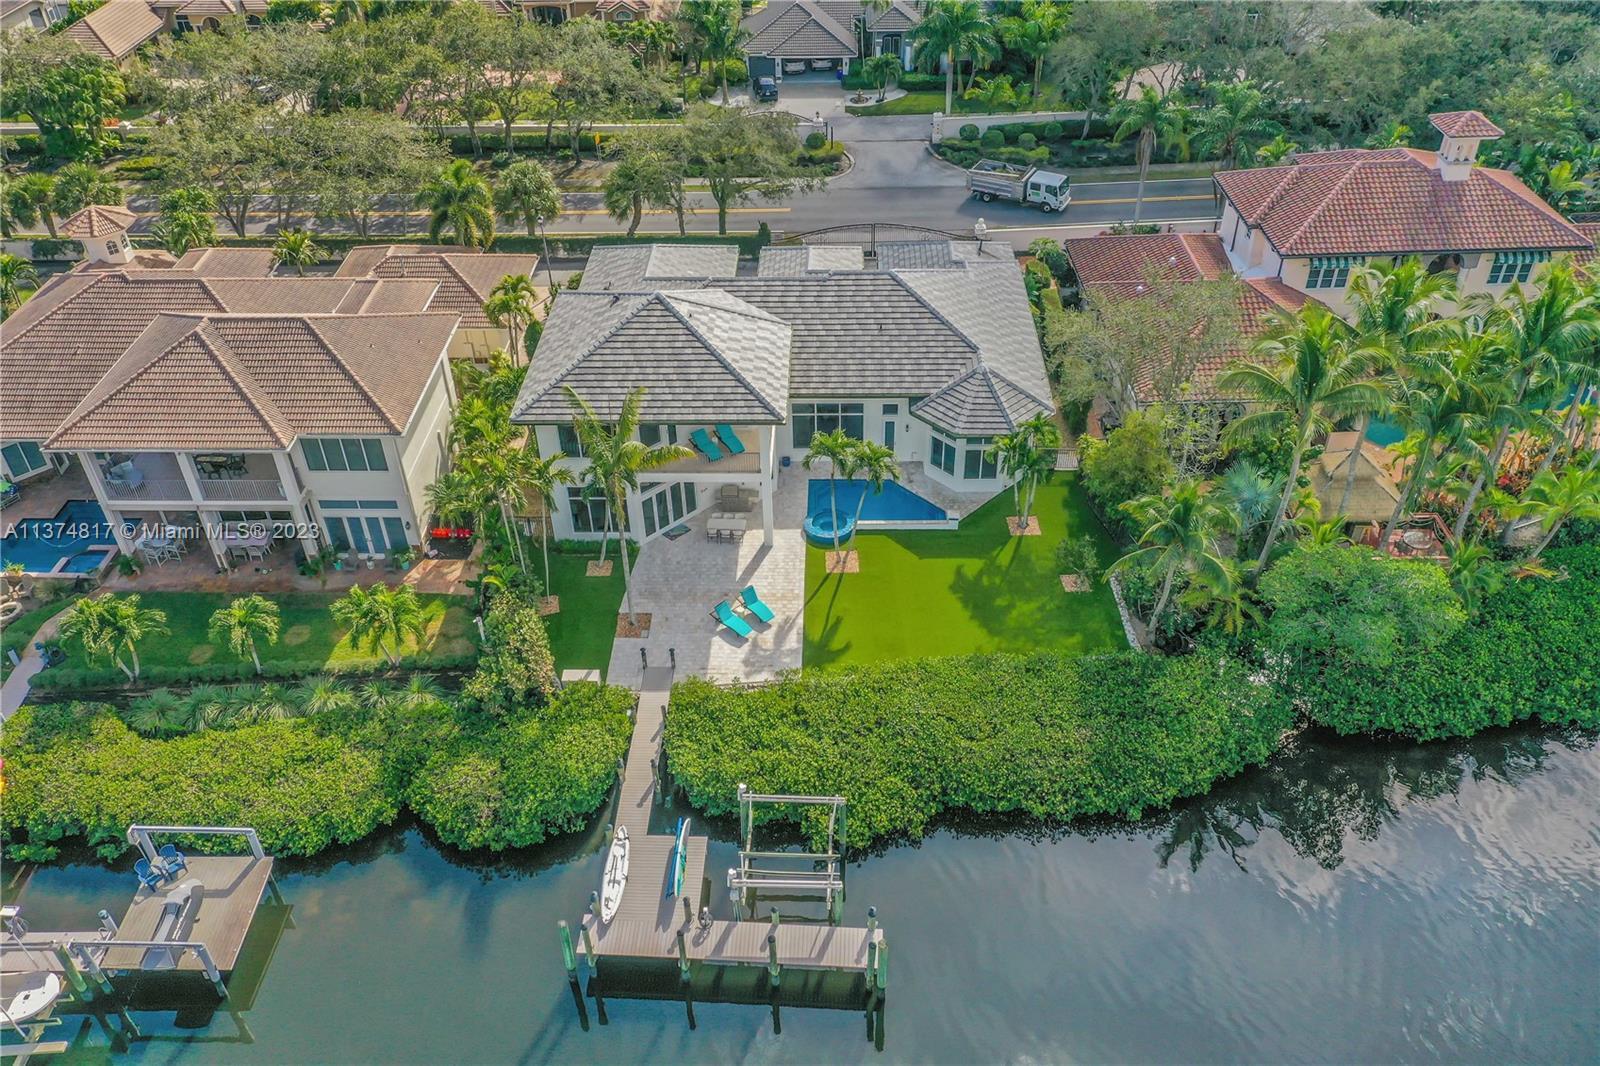 Located in the gated community of The Islands of Jupiter, this waterfront home could be perfect for 